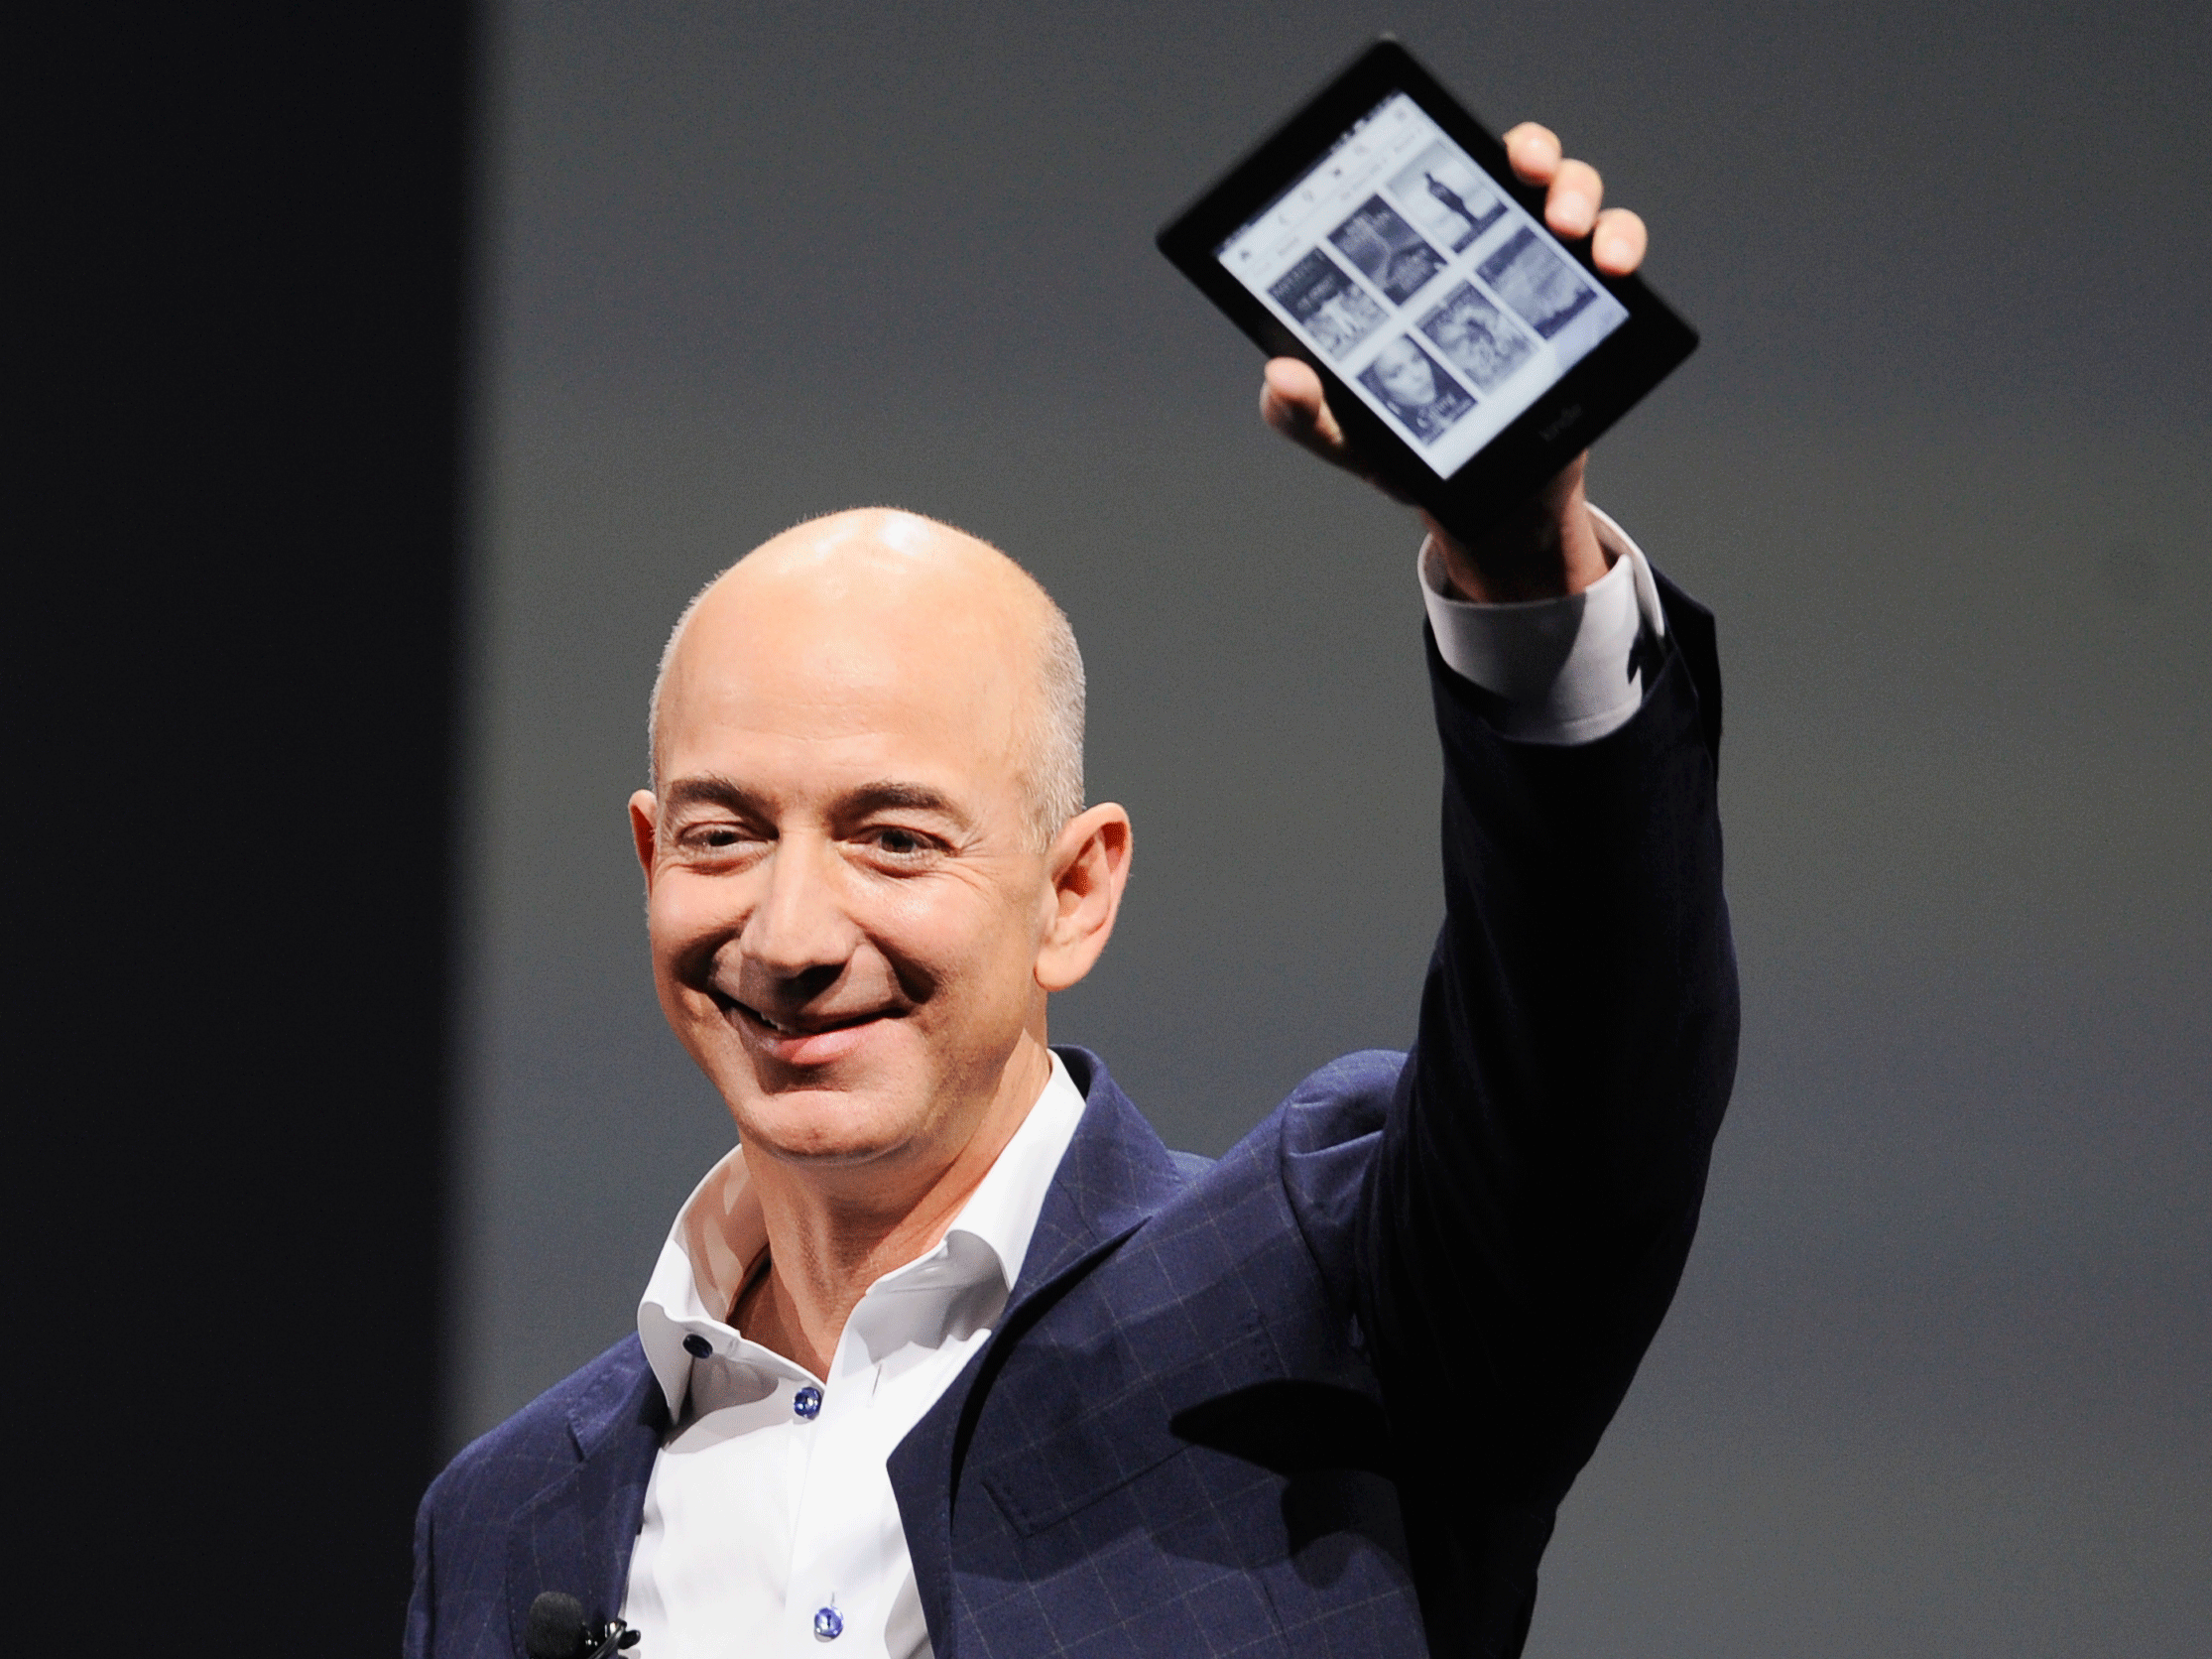 Despite the fall, Mr Bezos’ wealth has surged by $17bn already this year